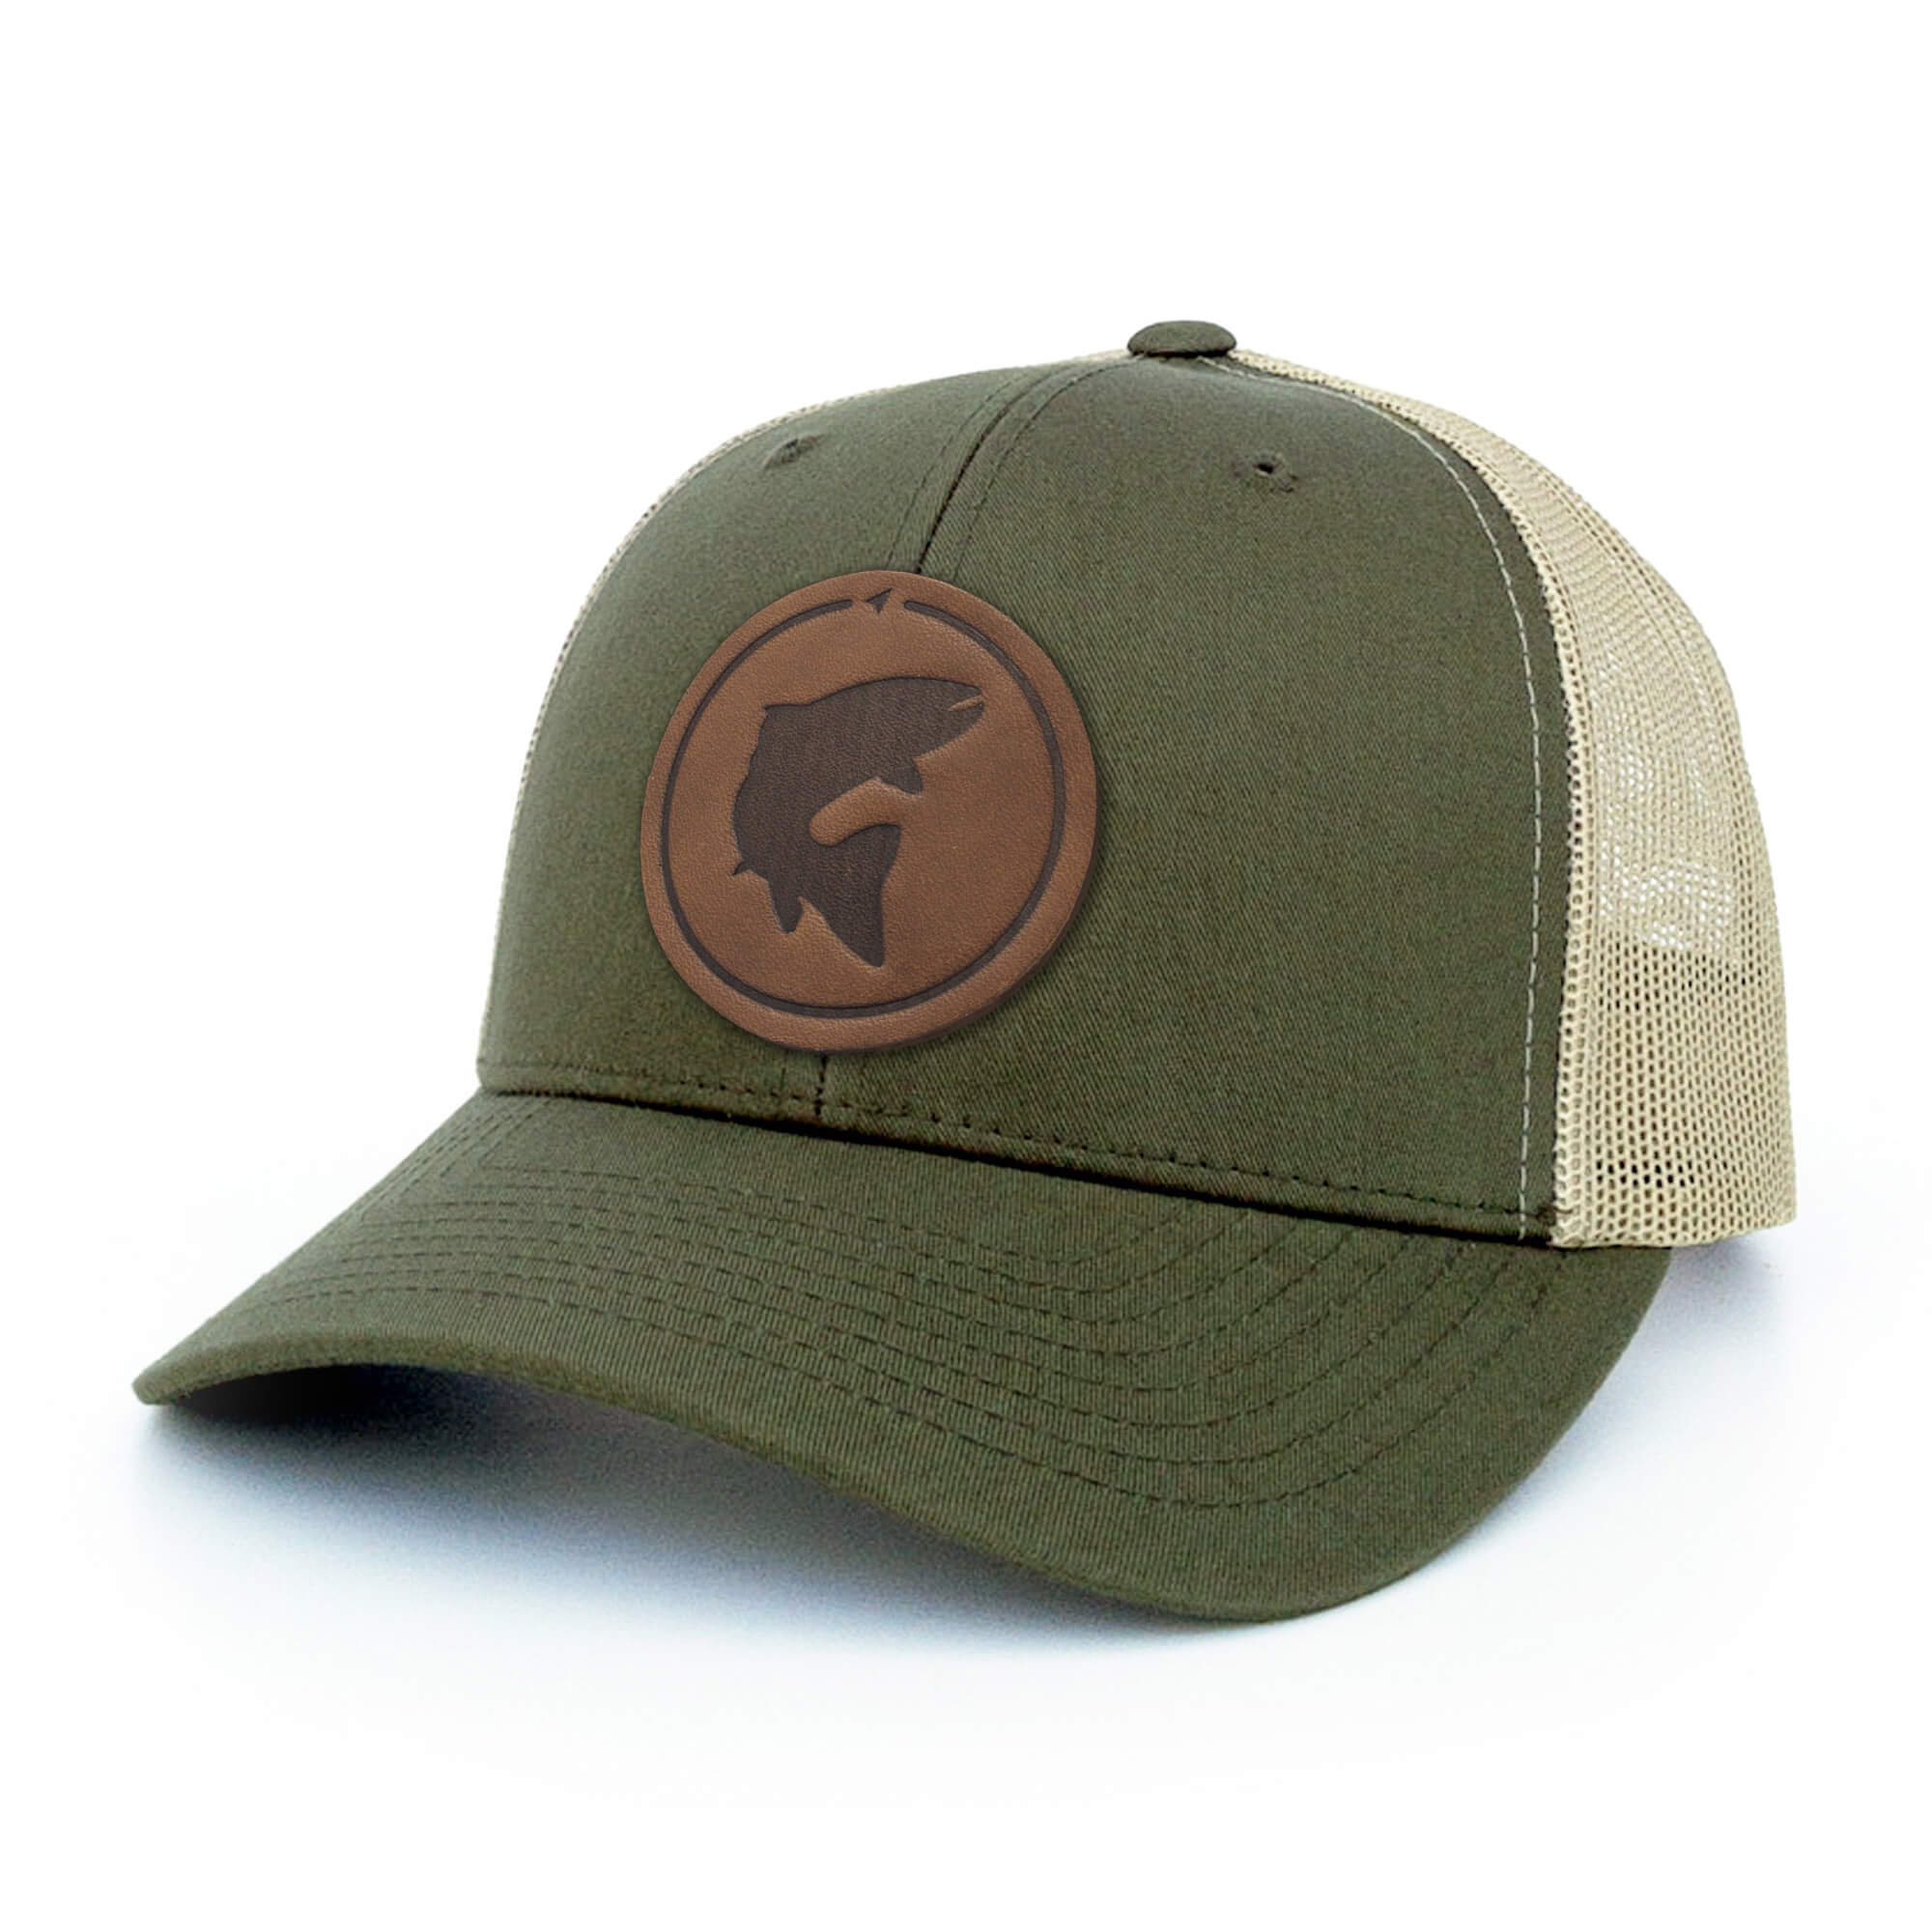 Moss Green and khaki trucker hat with full-grain leather patch of a Trout | BLACK-004-001, CHARC-004-001, NAVY-004-001, HGREY-004-001, MOSS-004-001, BROWN-004-001